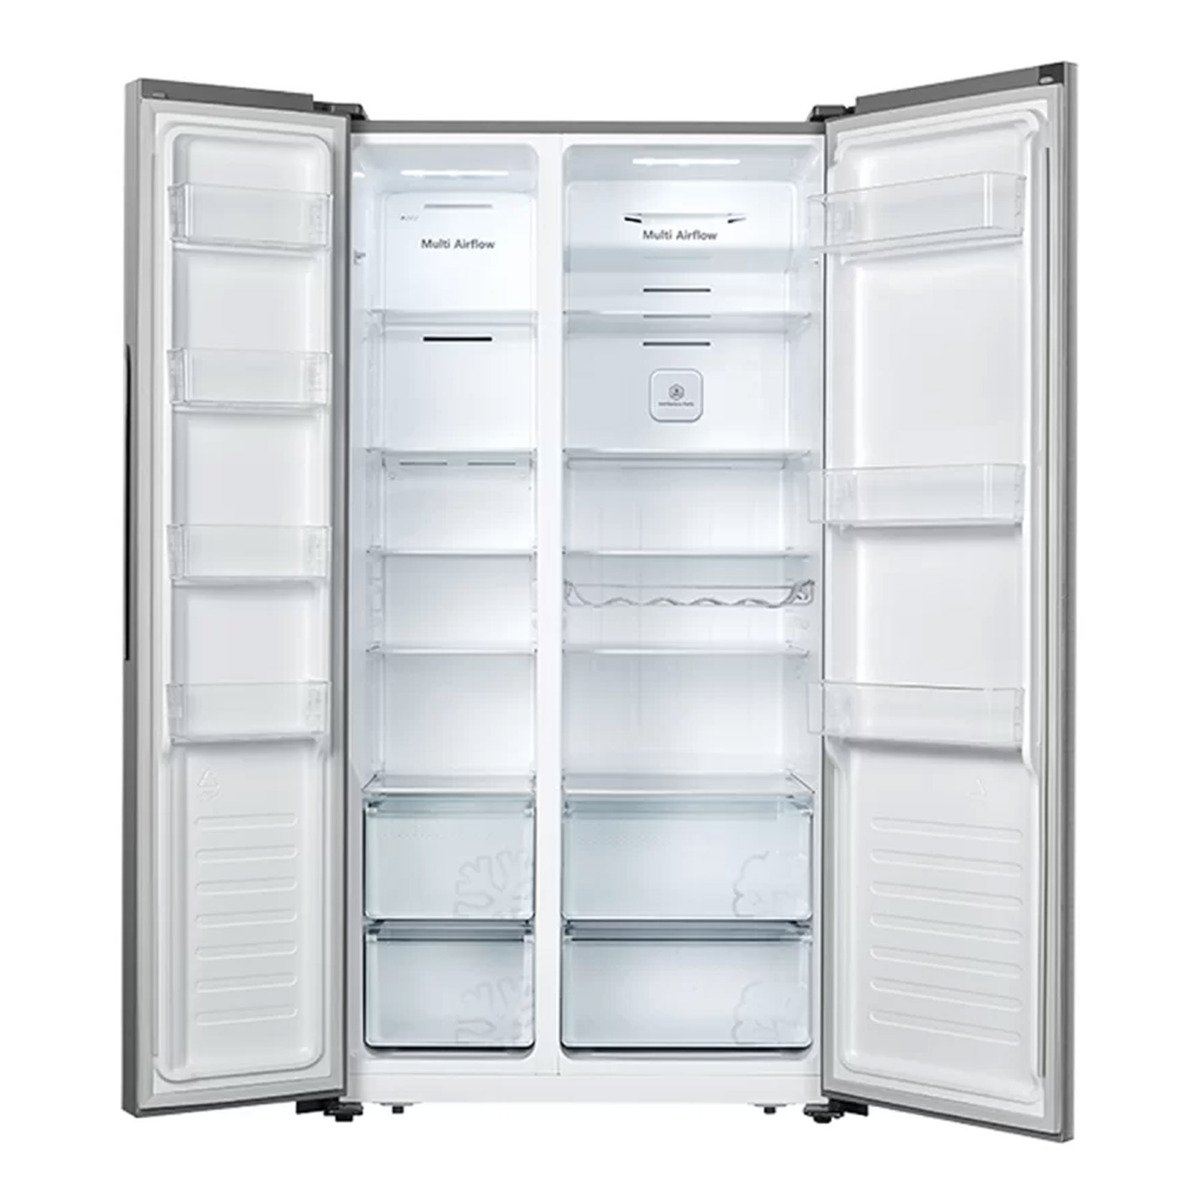 Hisense Side-By-Side Refrigerator, 509 L, Stainless Steel, RS67W2NQ